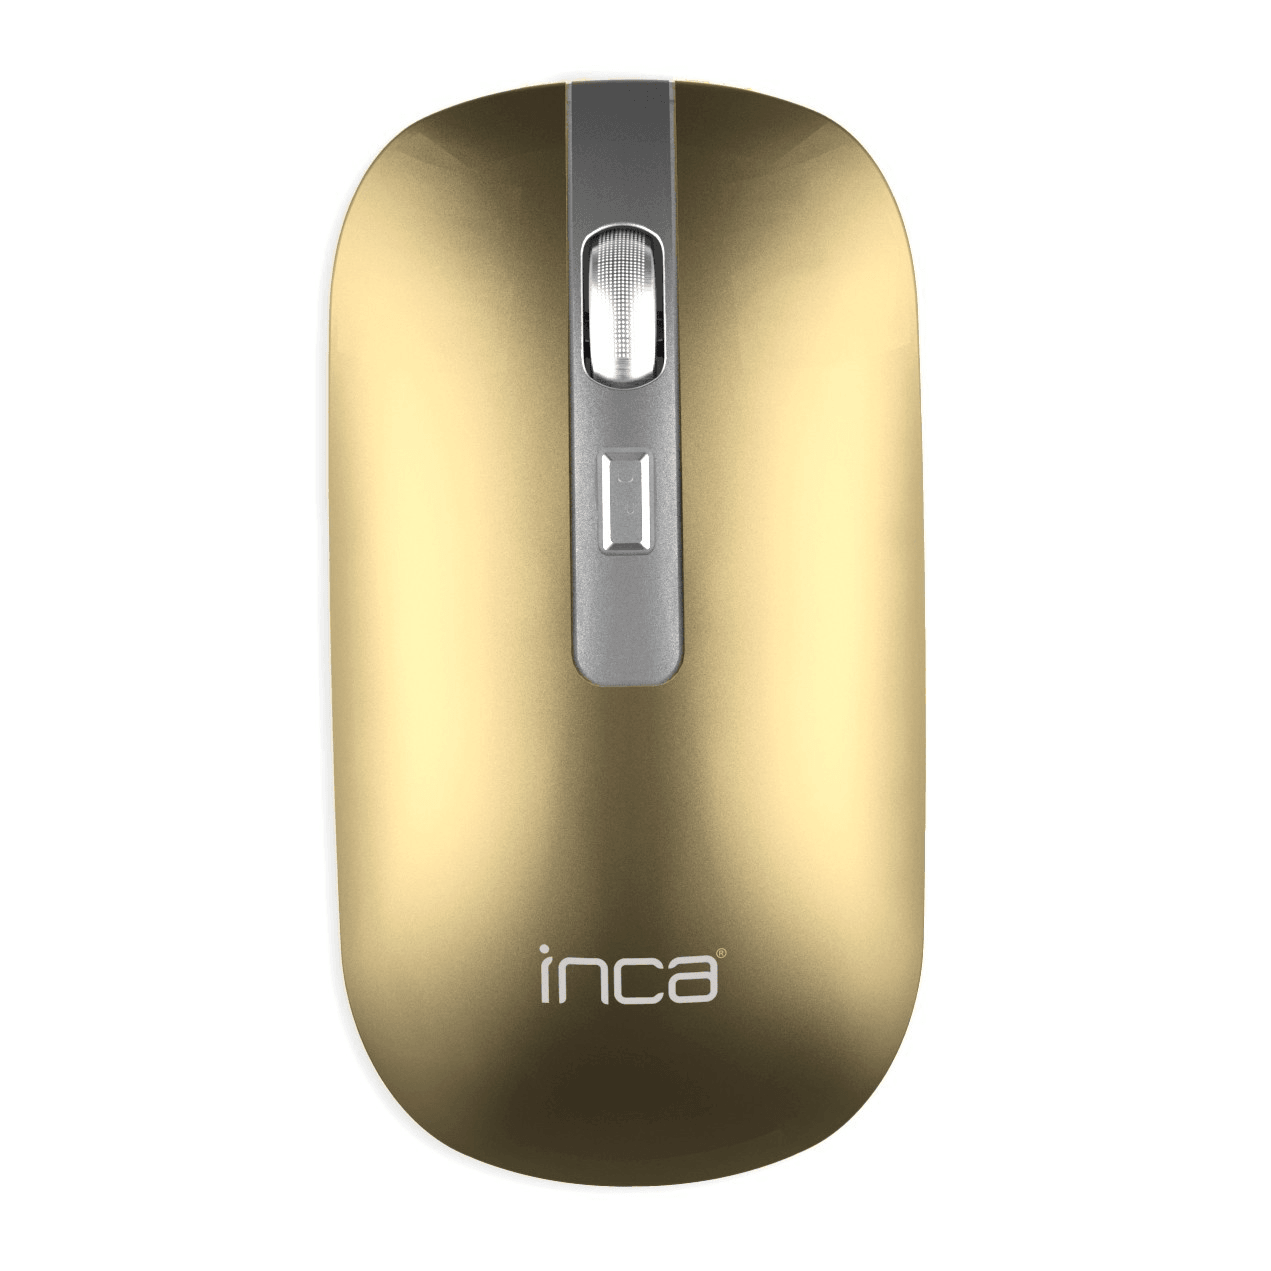 INCA IWM-531RS Bluetooth & Wireless Rechargeable Special Metallic Silent Mouse